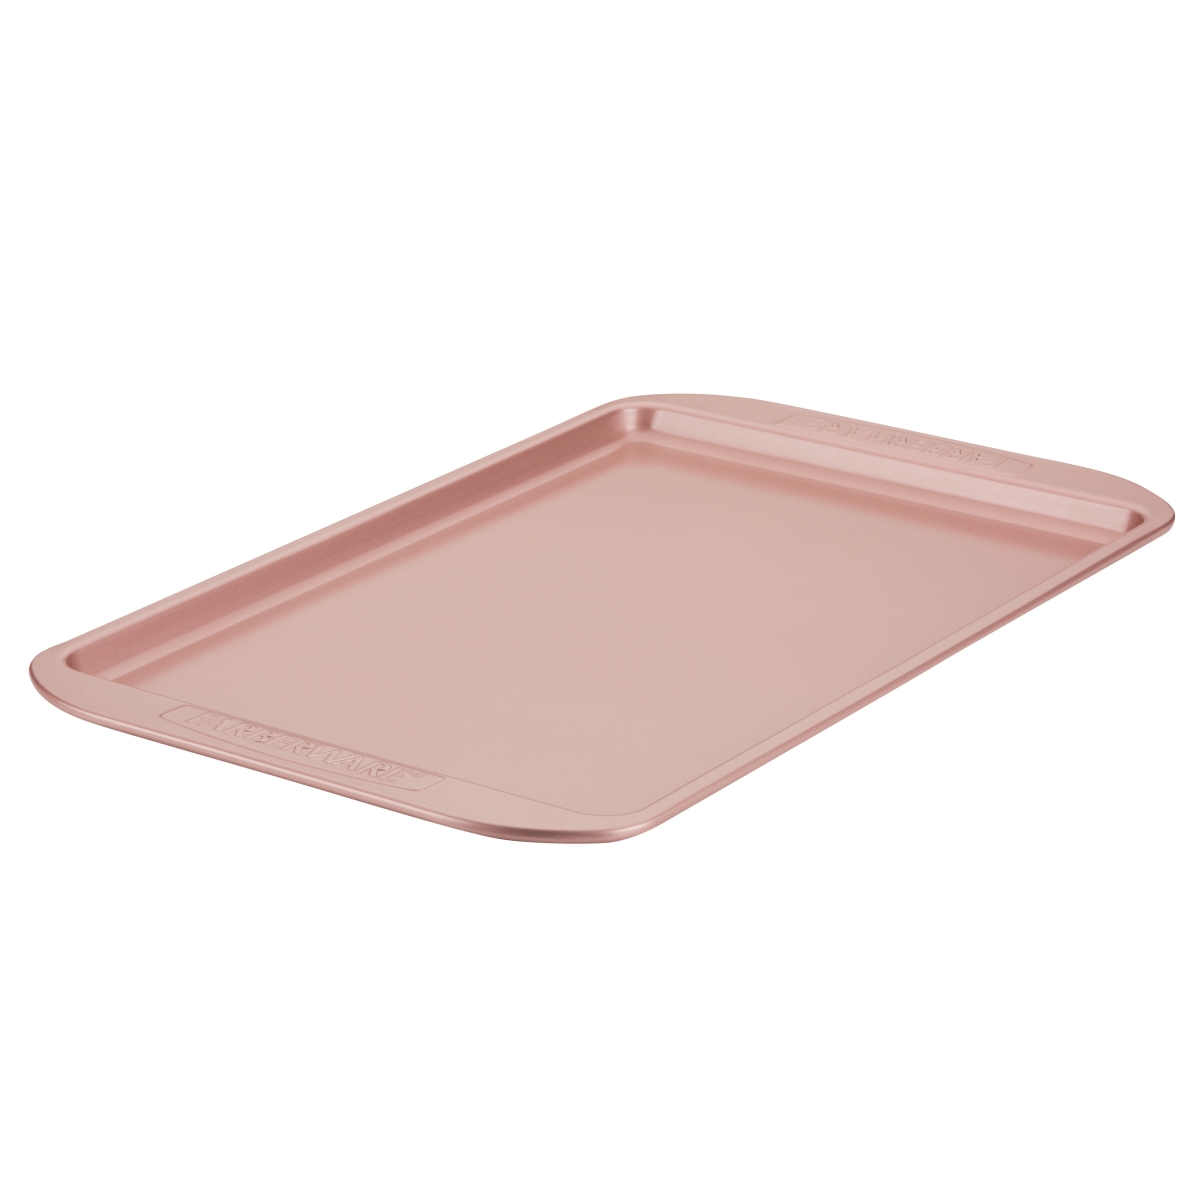 Picture of Farberware 47774 10 x 15 in. Nonstick Bakeware Cookie Pan - Rose Gold